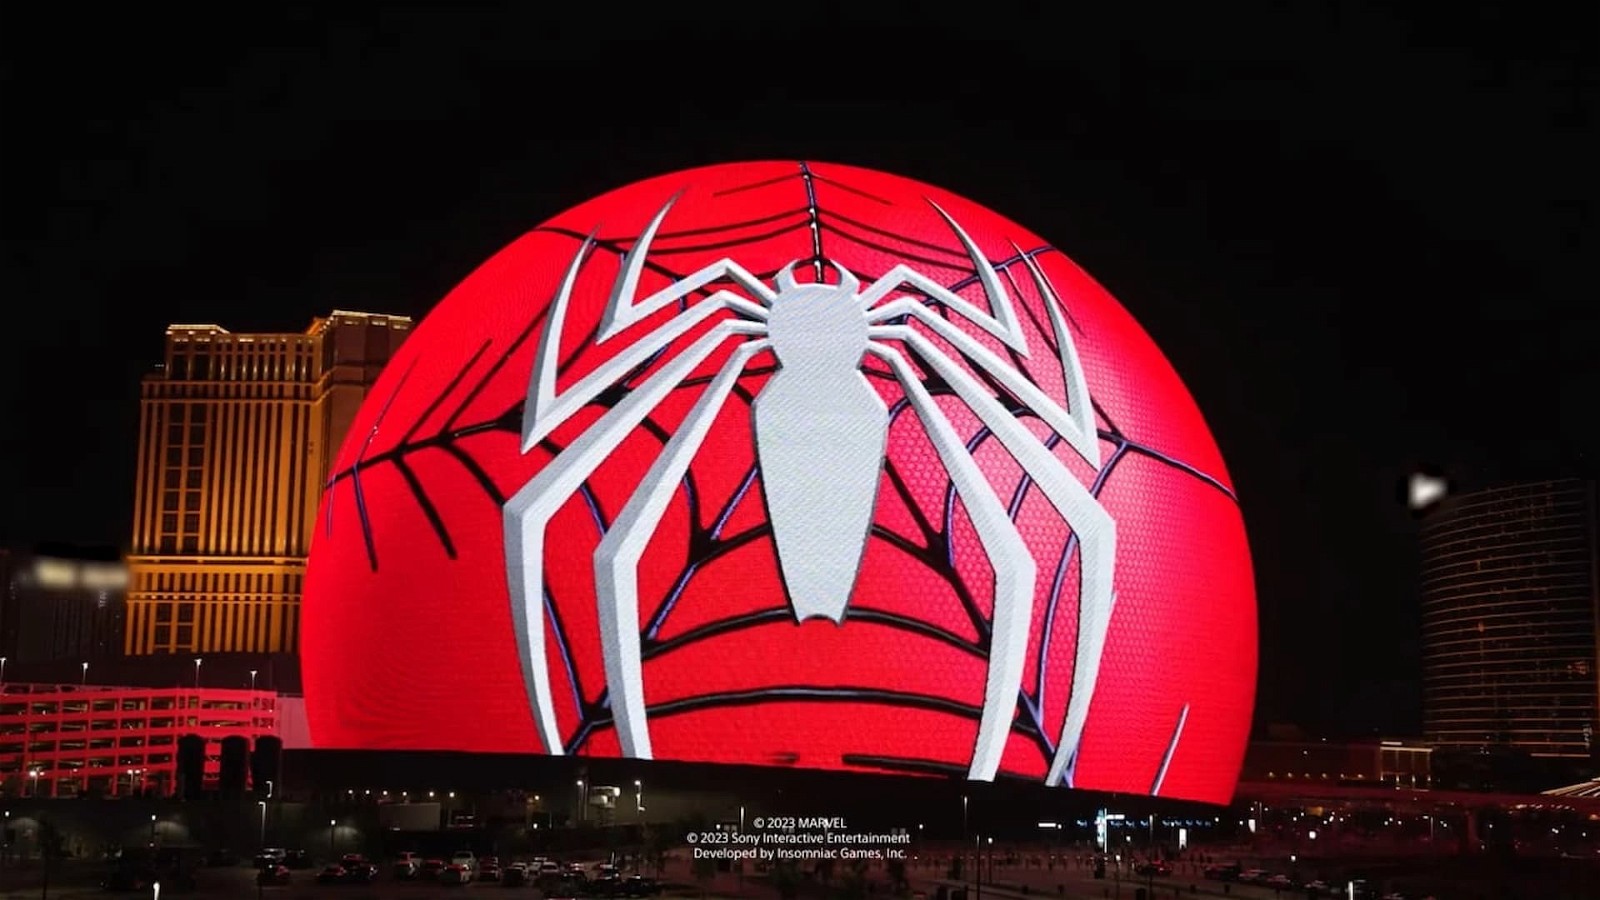 Marvel’s Spider-Man 2 takes over the popular Las Vegas Sphere in an advert.